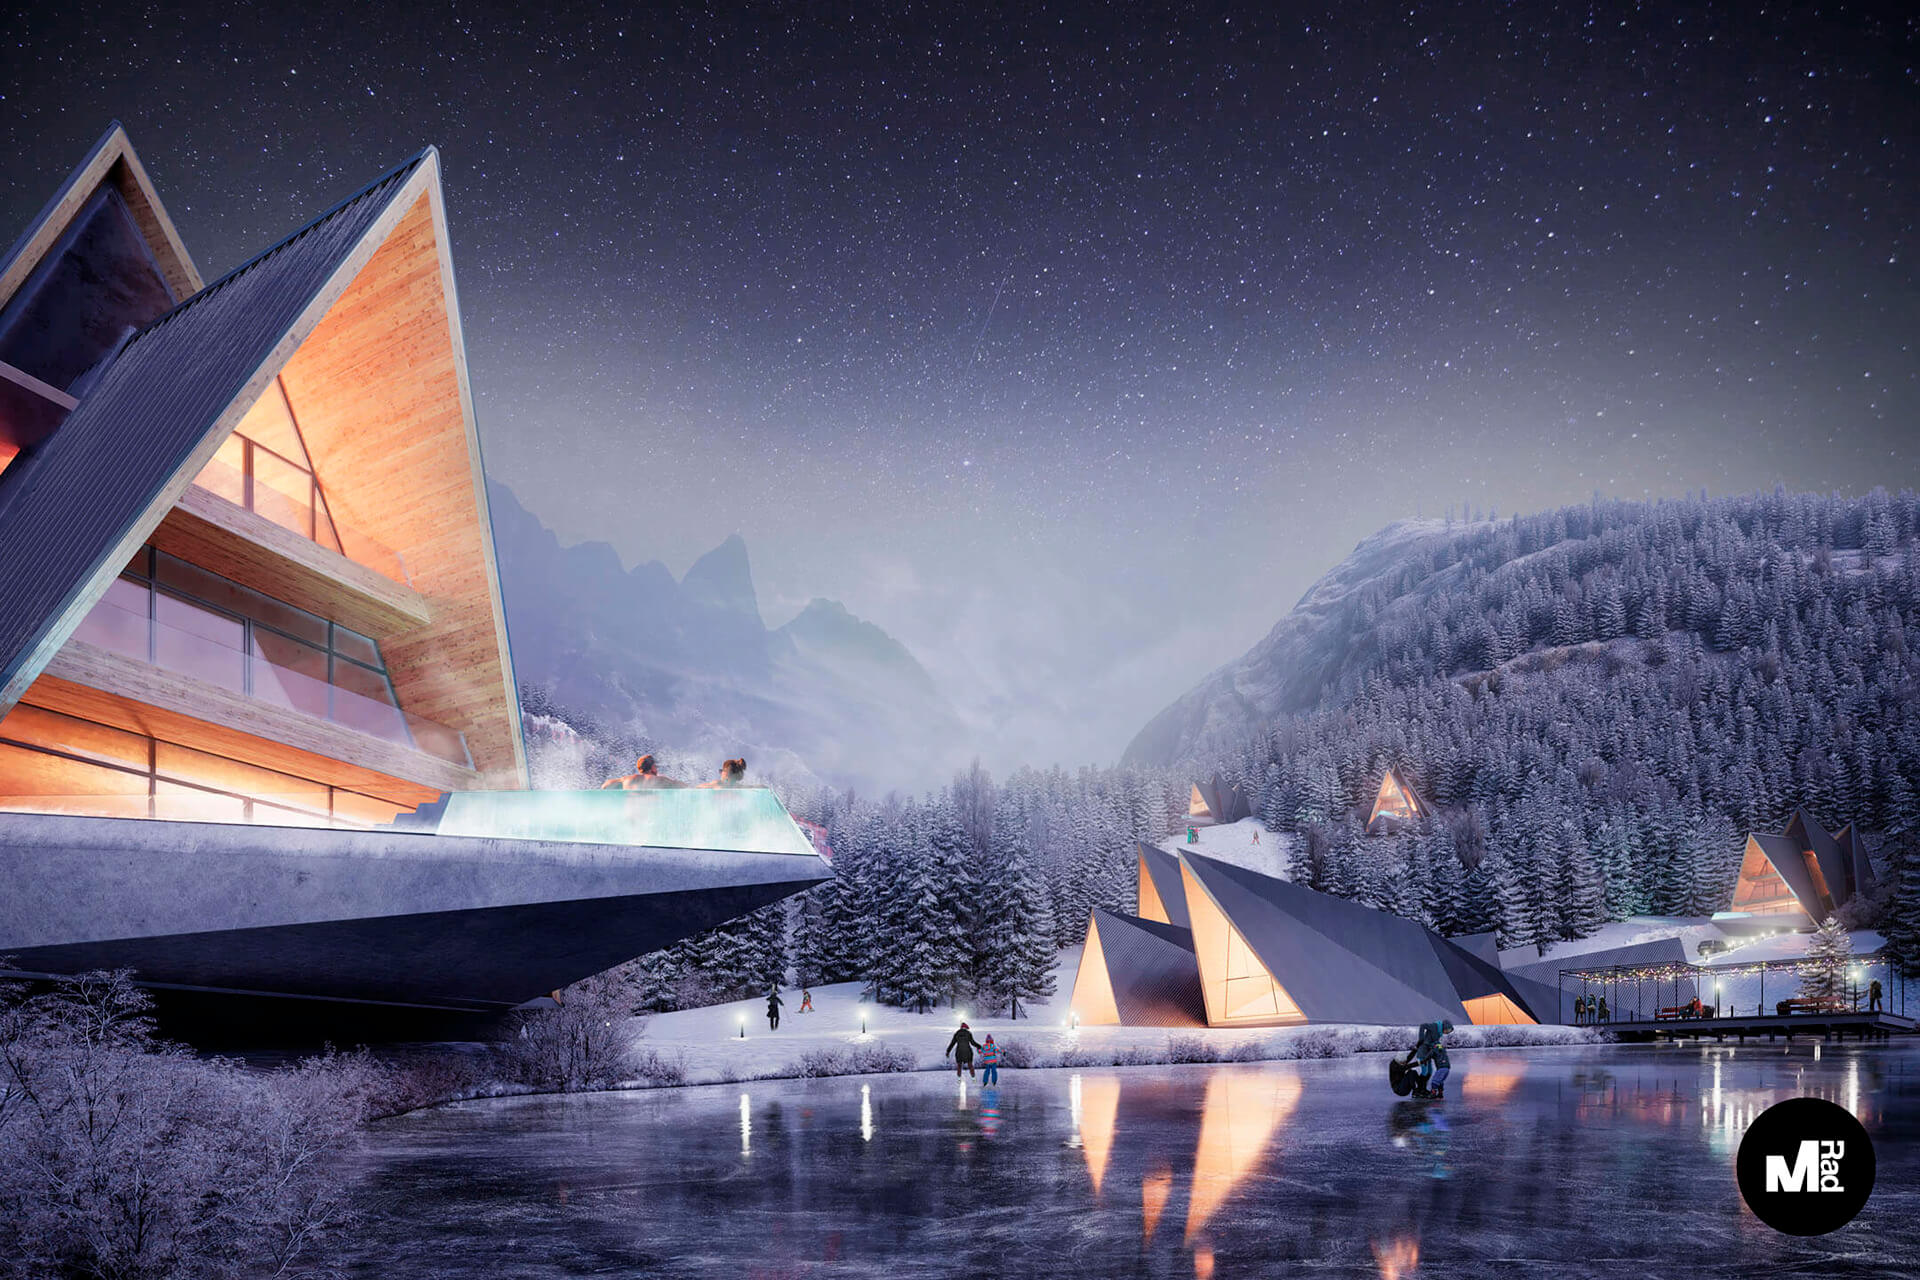 Nighttime Winter Setting in a 3D Rendering of a Hotel